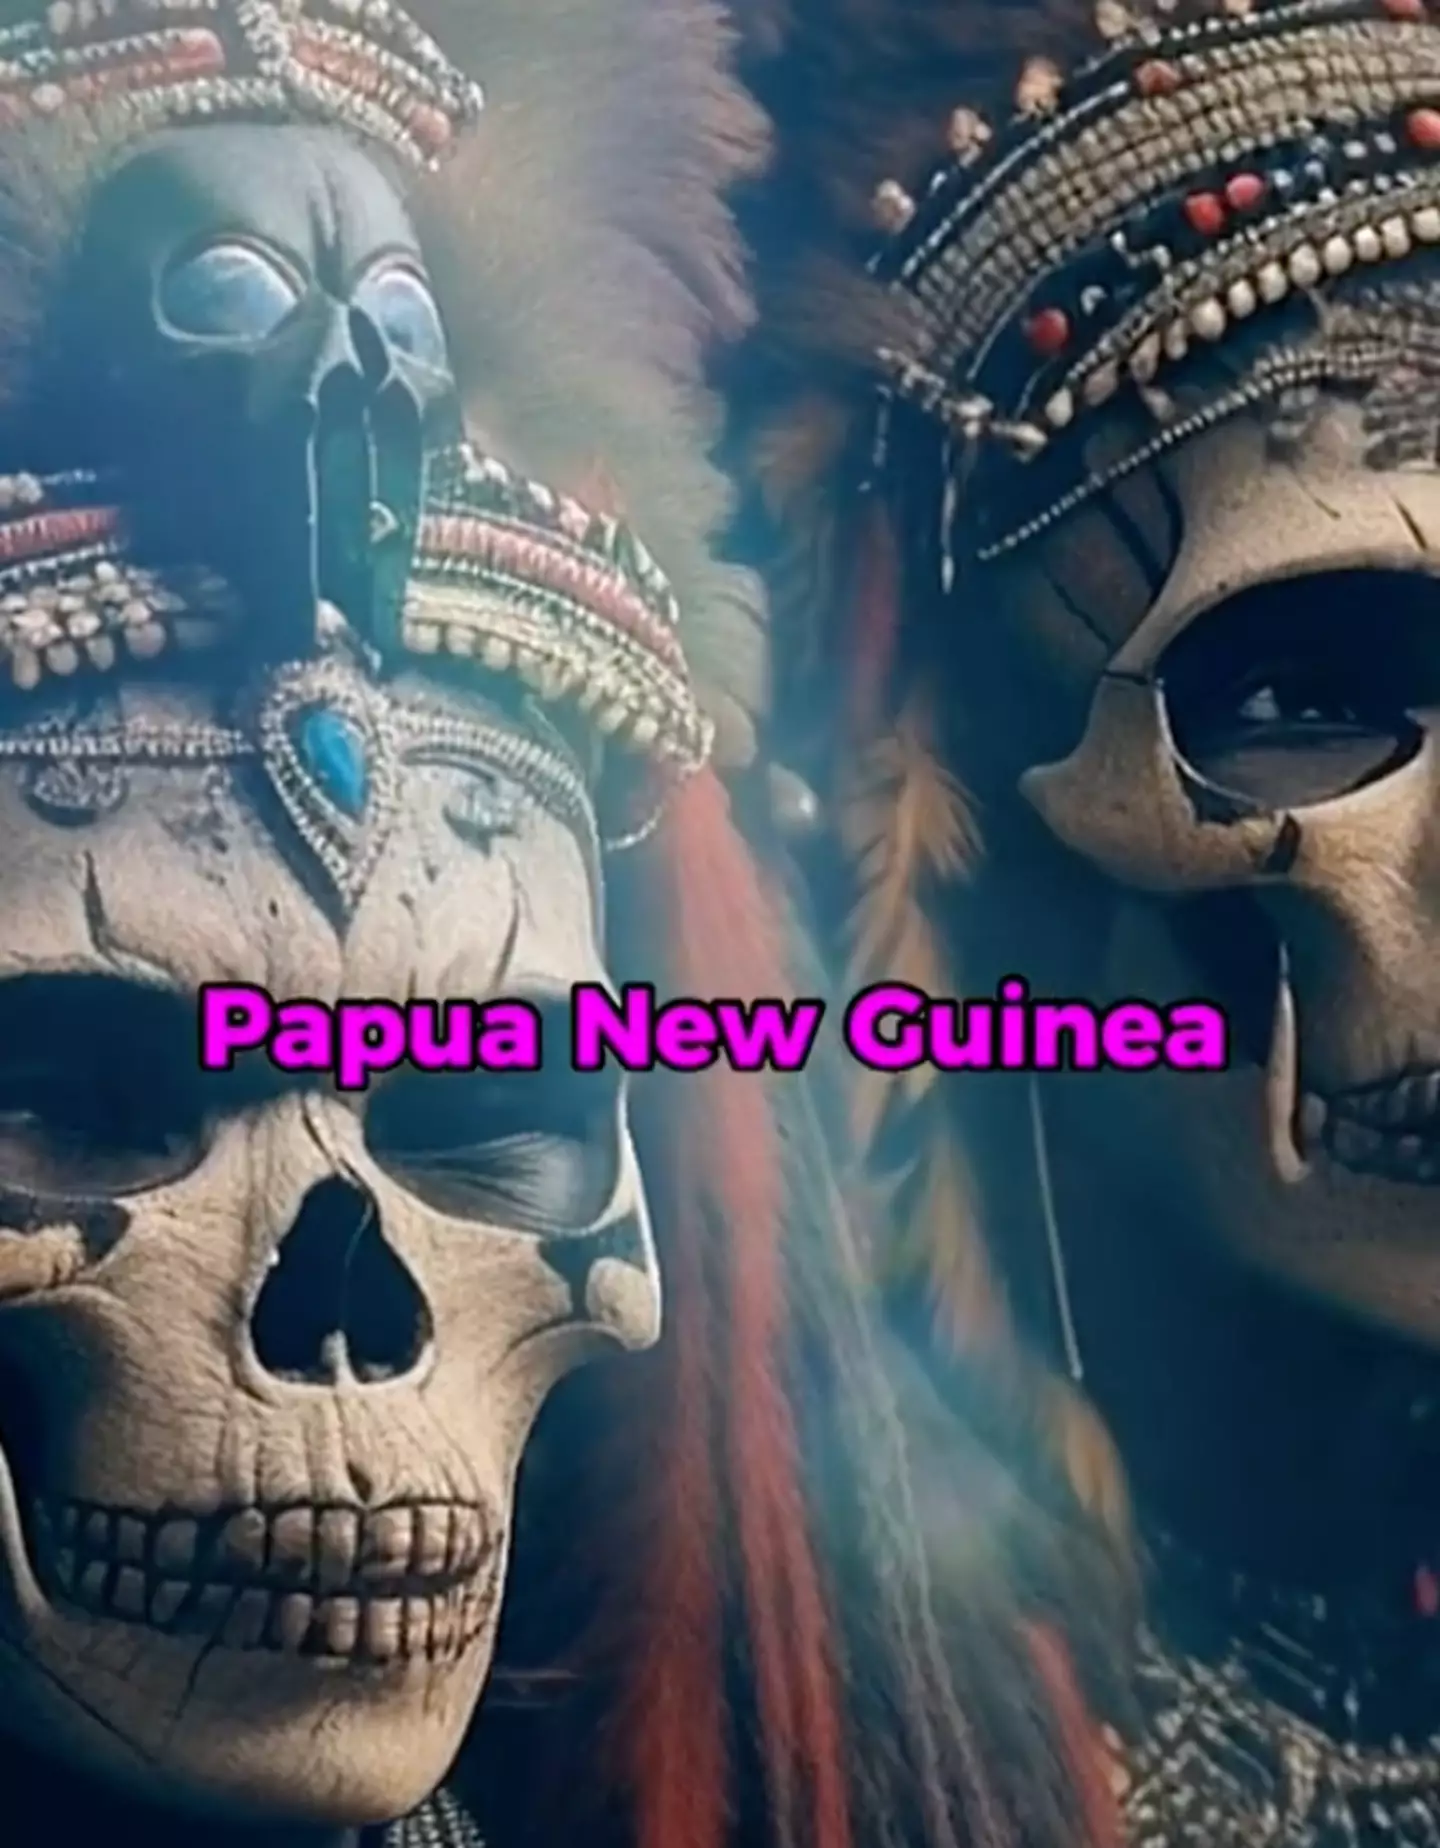 The disease started off in Papua New Guinea.